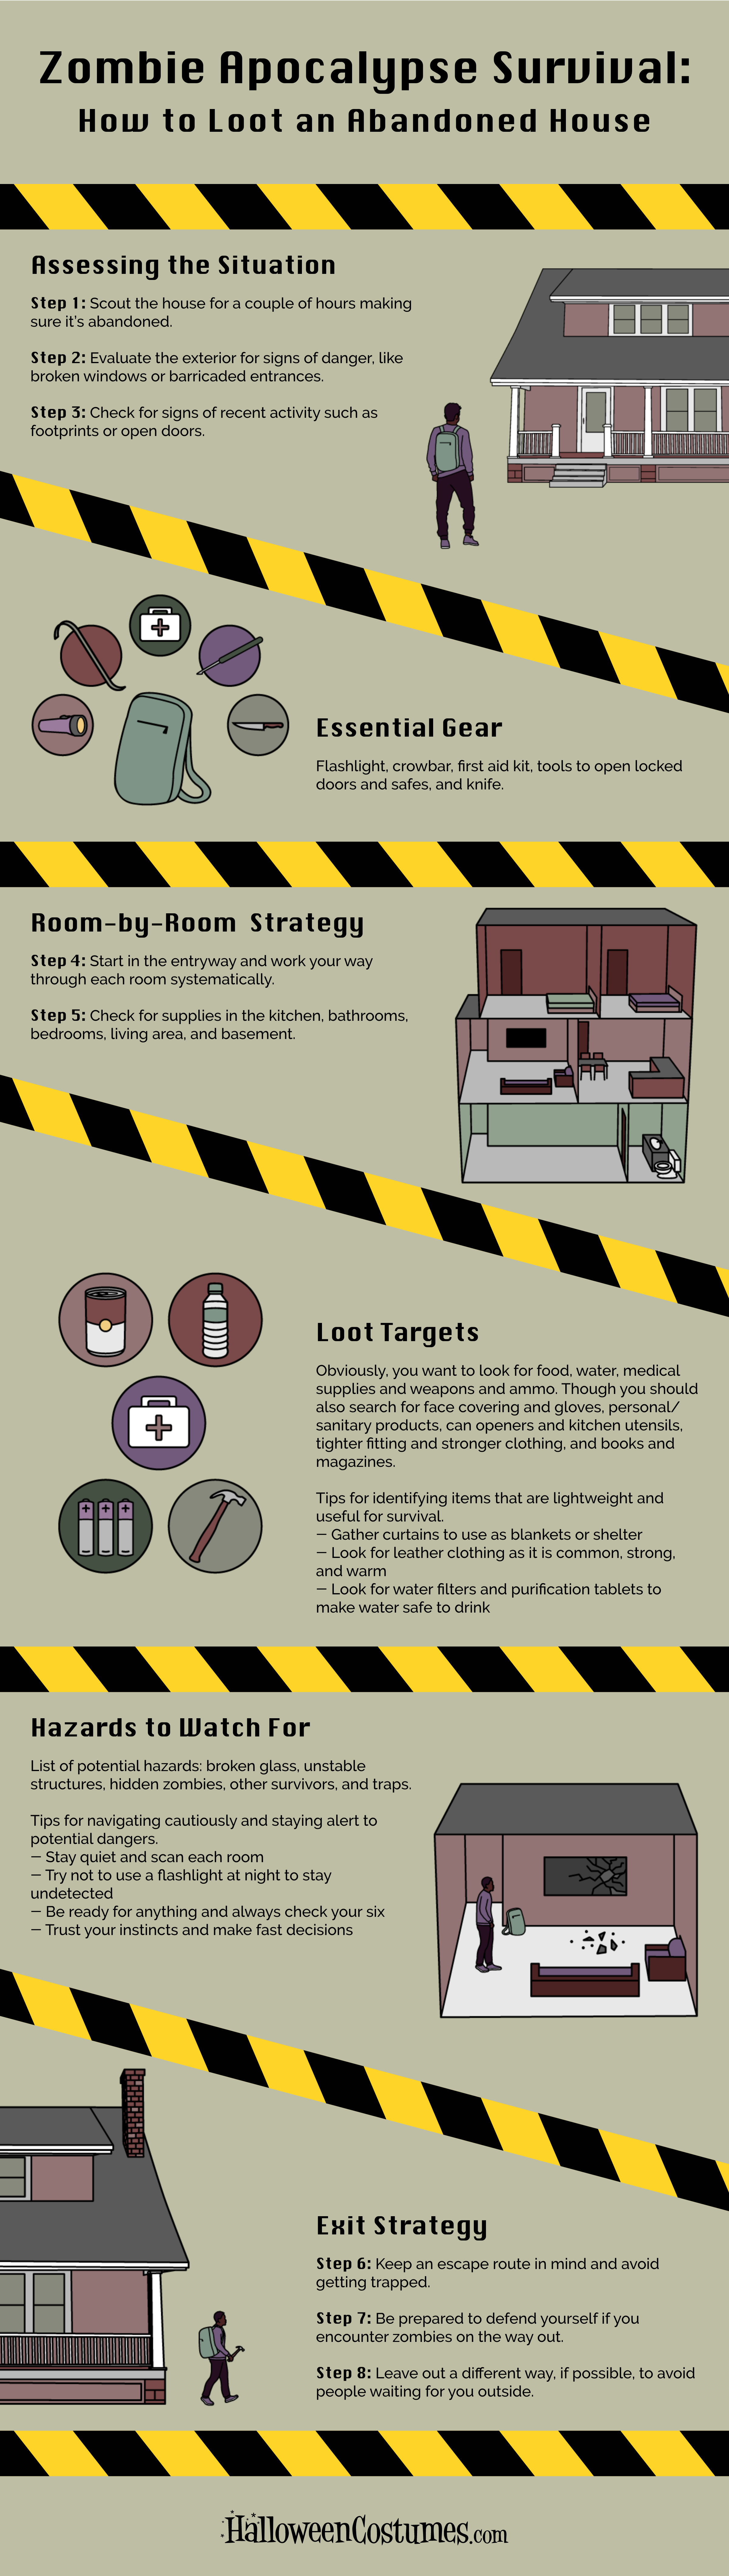 How to Loot an Abandoned House in a Zombie Apocalypse Infographic